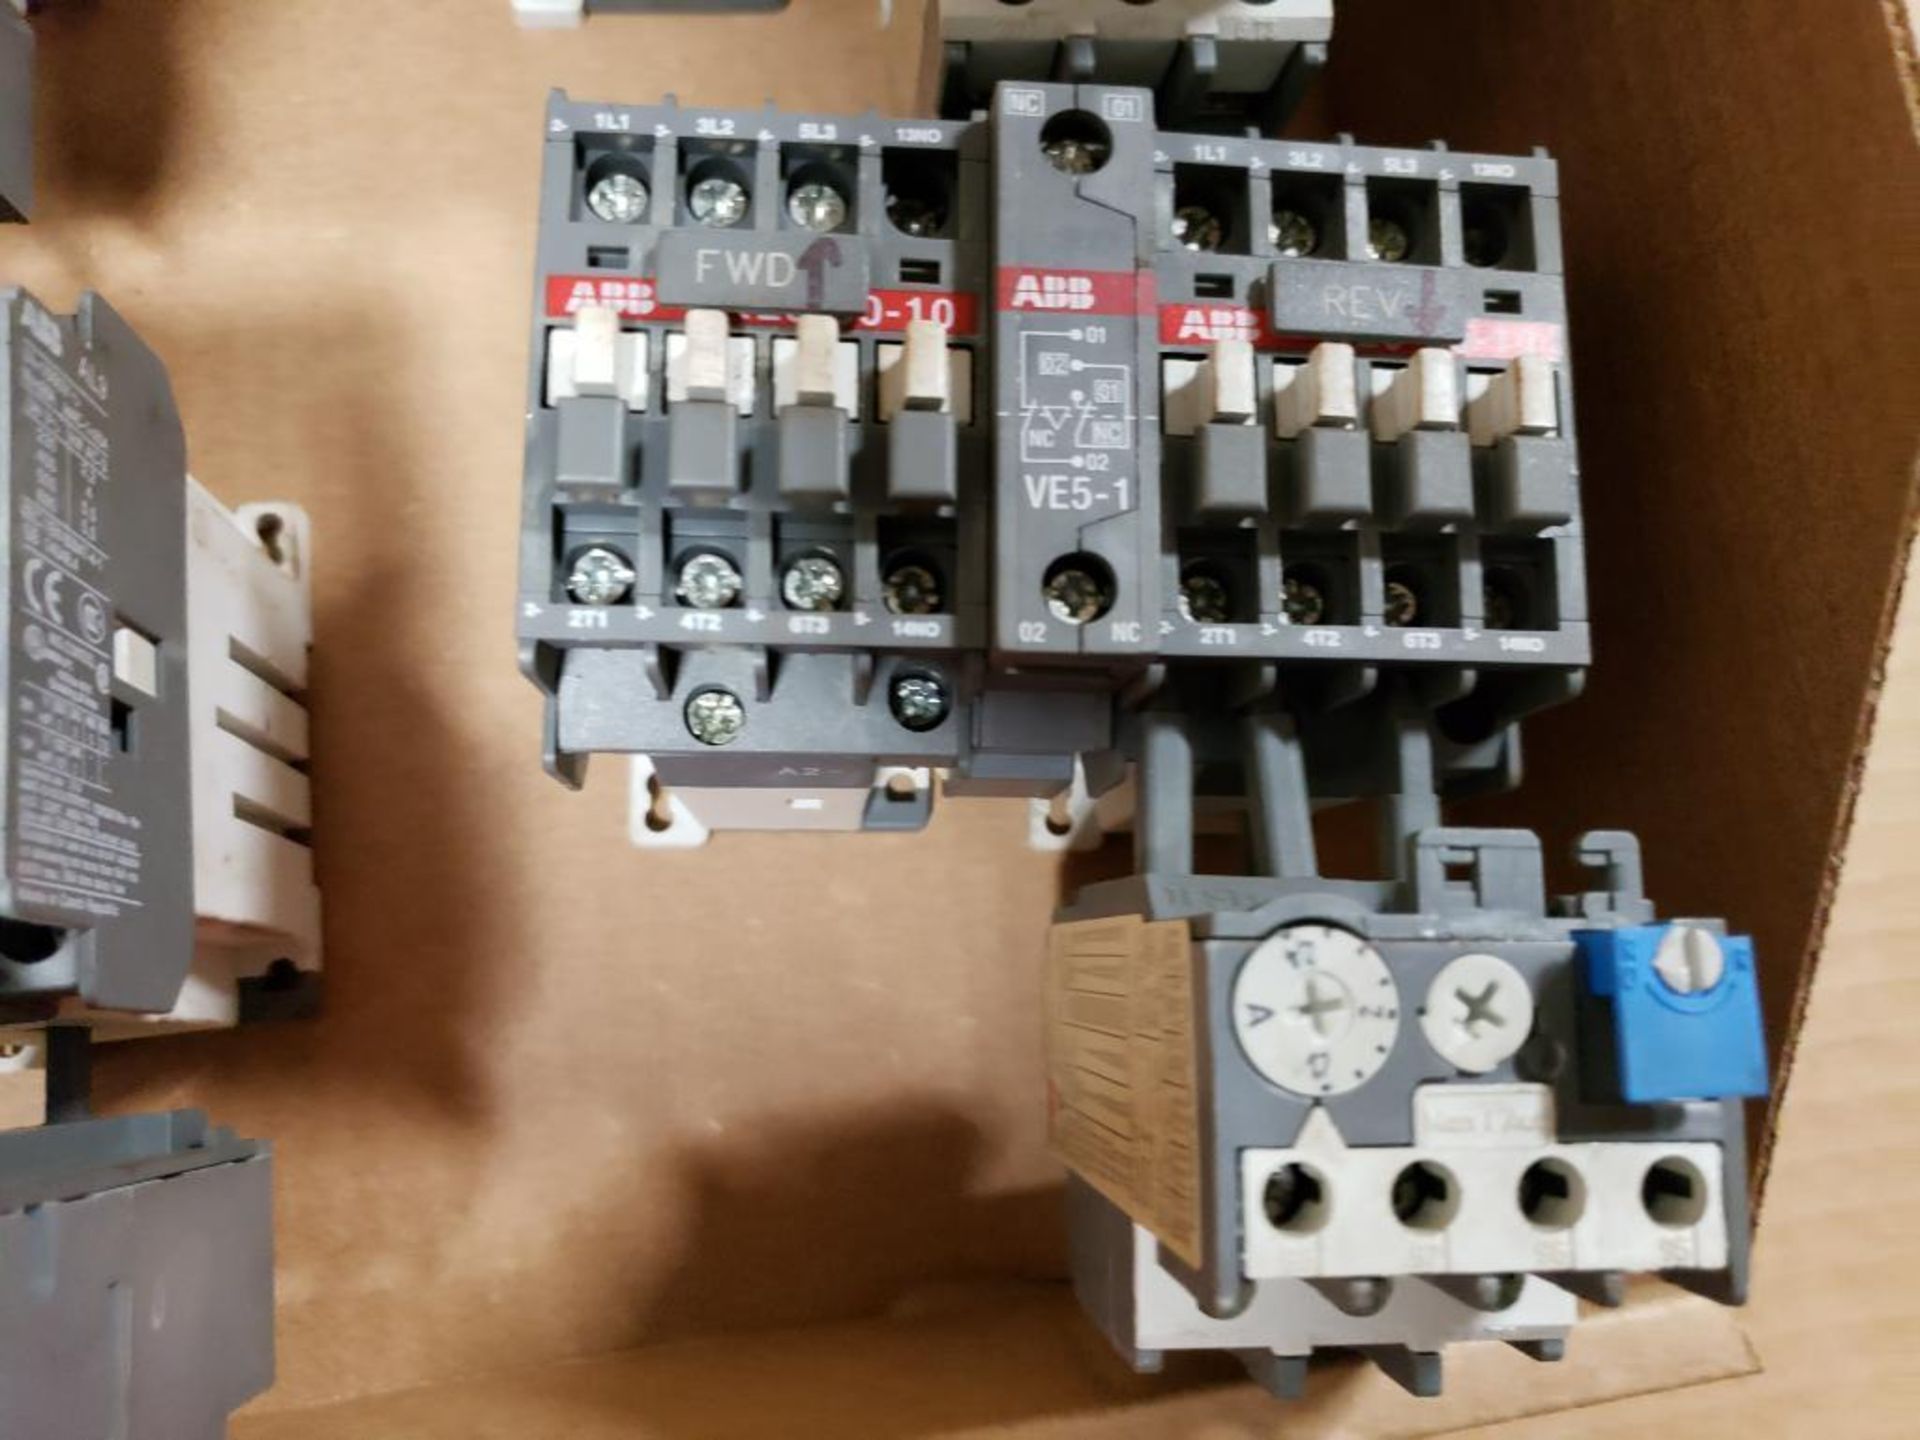 Qty 4 - ABB AL9 contactor and relay assembly. - Image 5 of 7